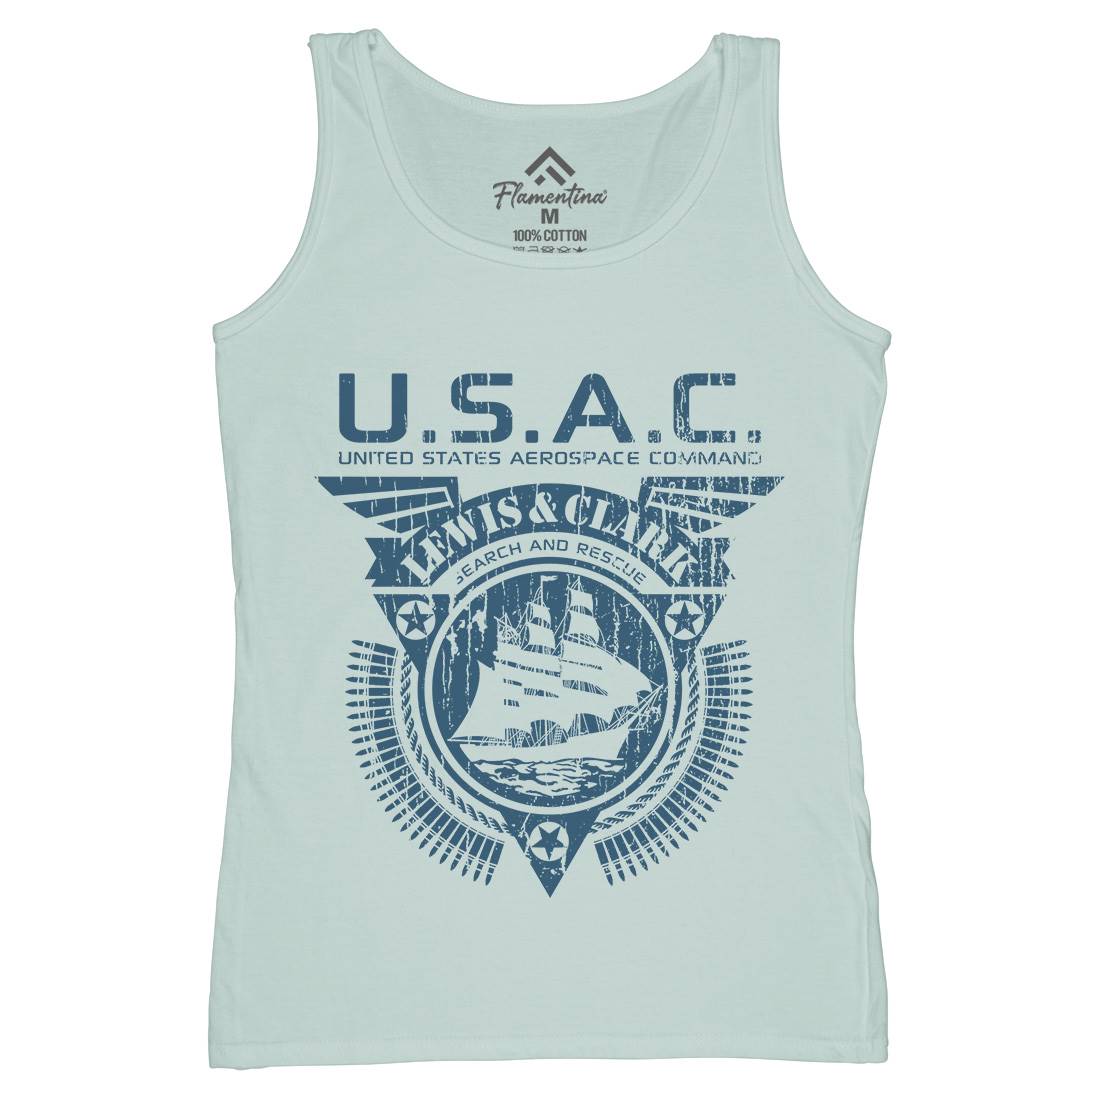 Usac Lewis And Clark Womens Organic Tank Top Vest Space D297